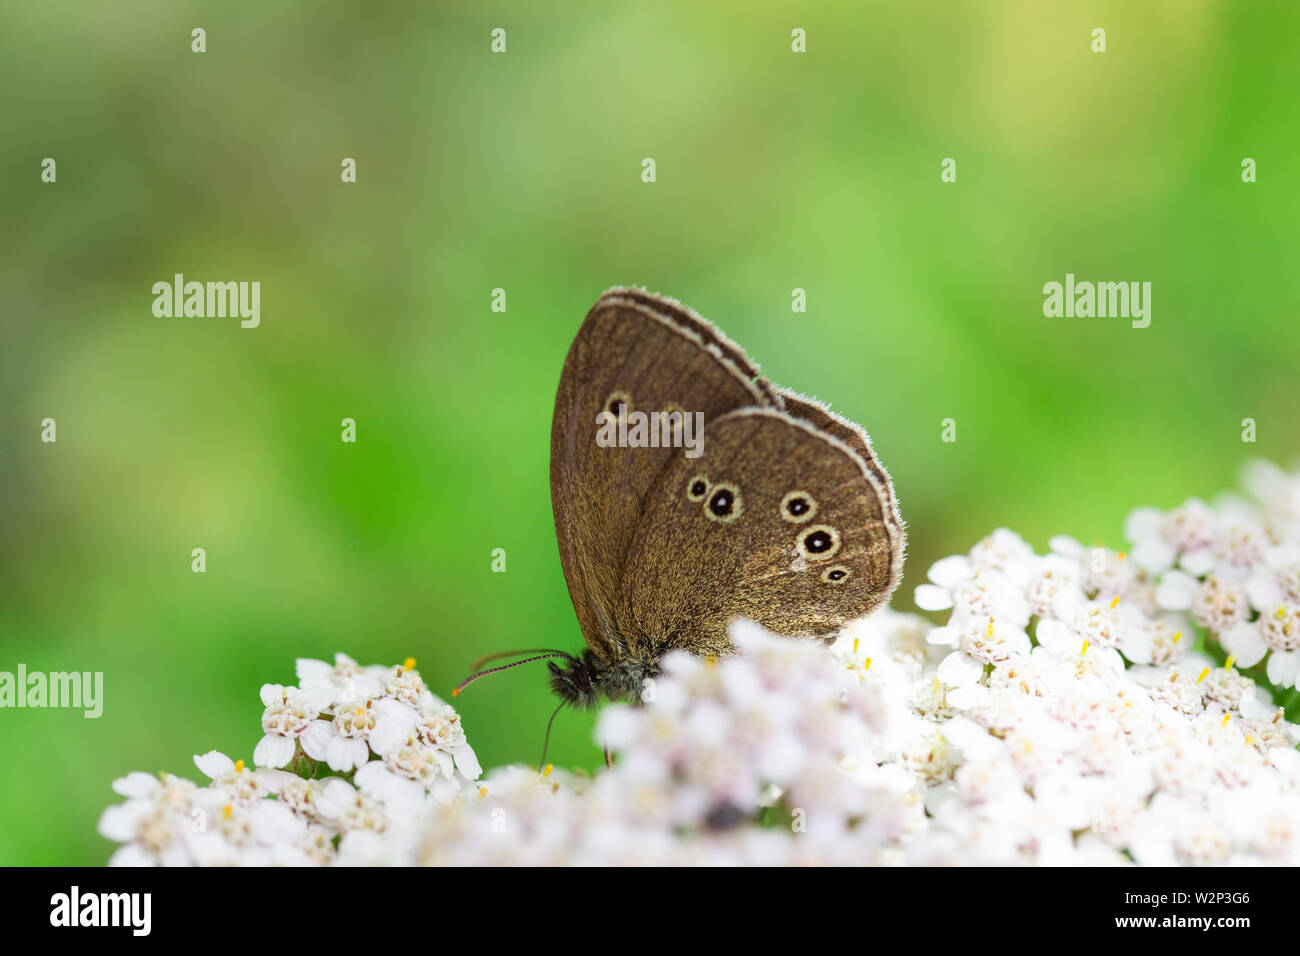 A brown butterfly (Aphantopus hyperantus) sucking nectar from small white flowers on a green background Stock Photo